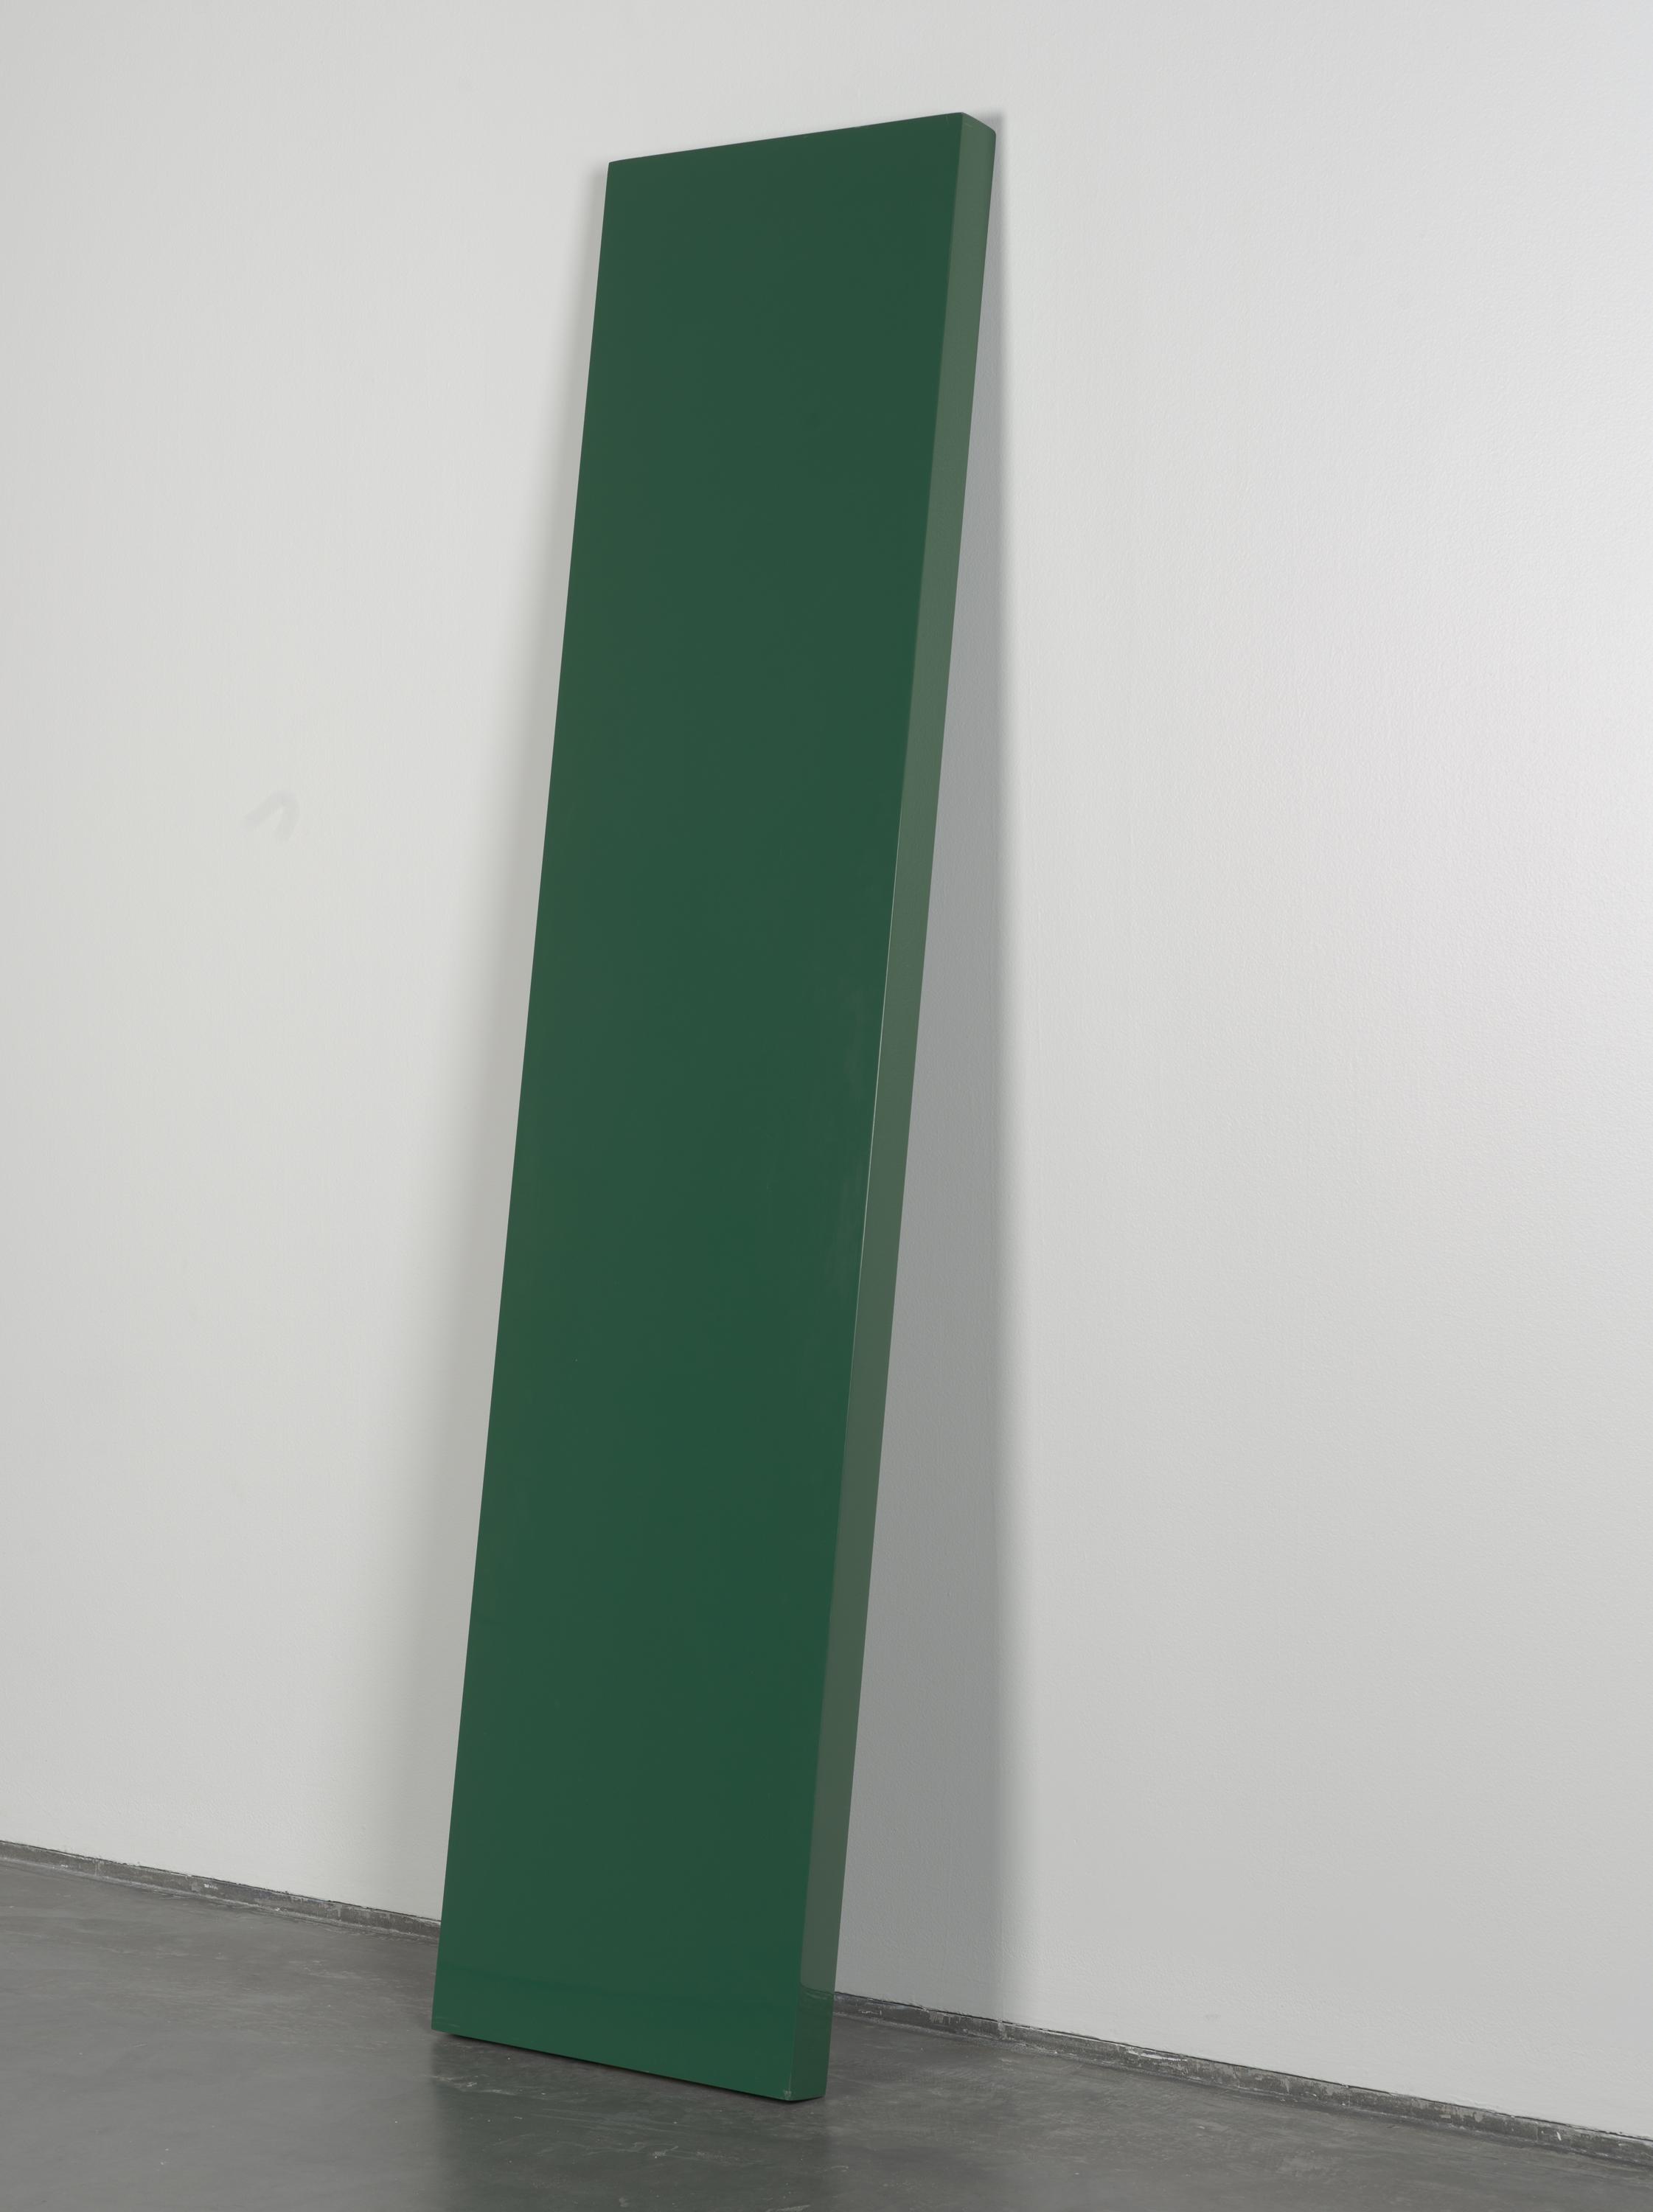 A glossy green plank leans against a white gallery wall. Its rectangular form stands vertically and would be taller than most people.